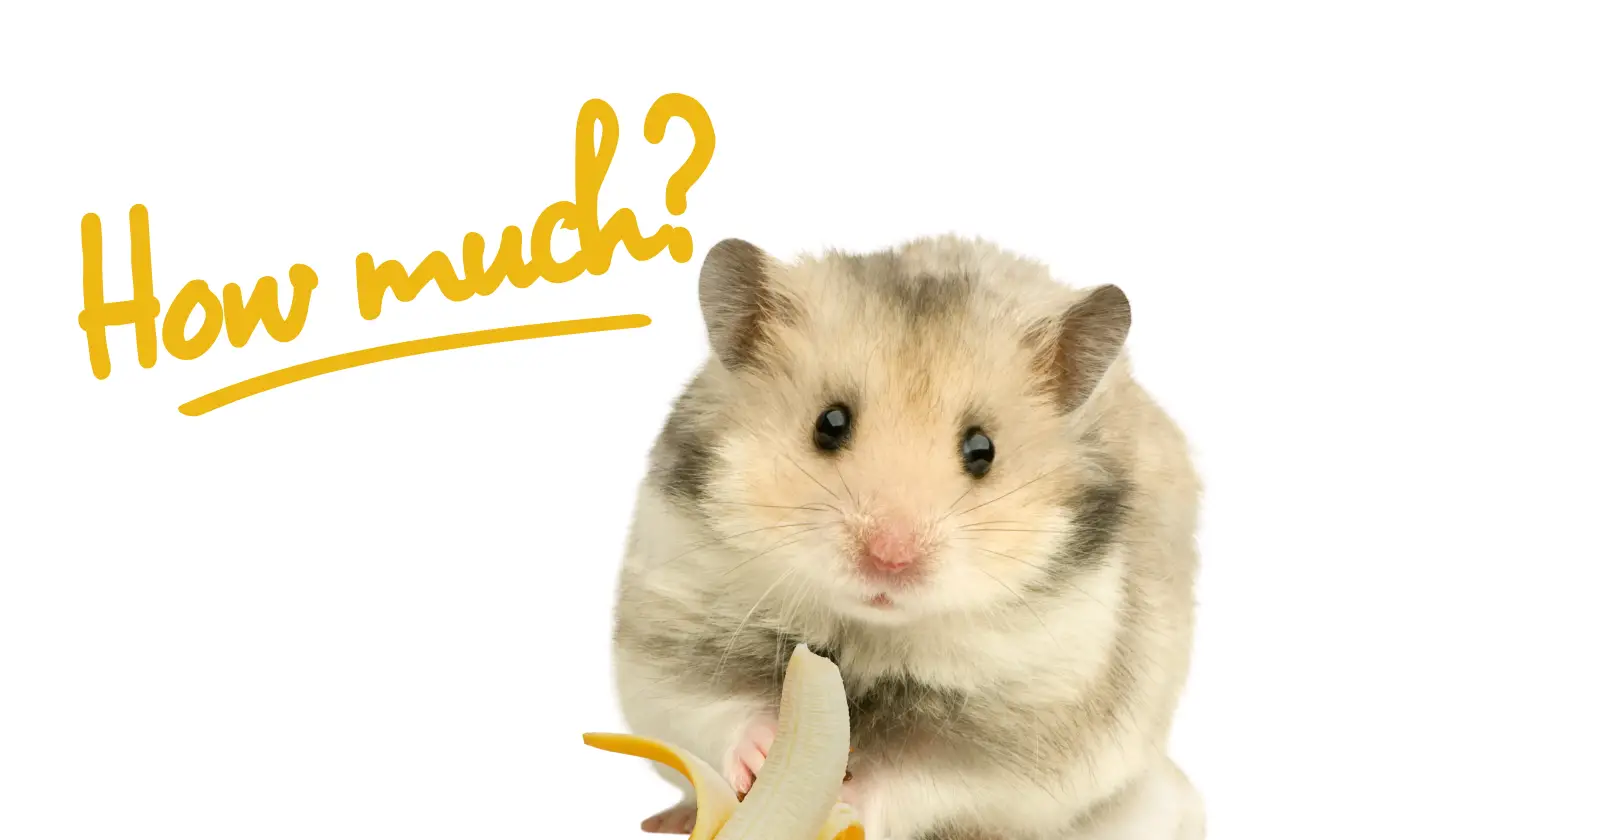 How Much Banana Can A Hamster Eat